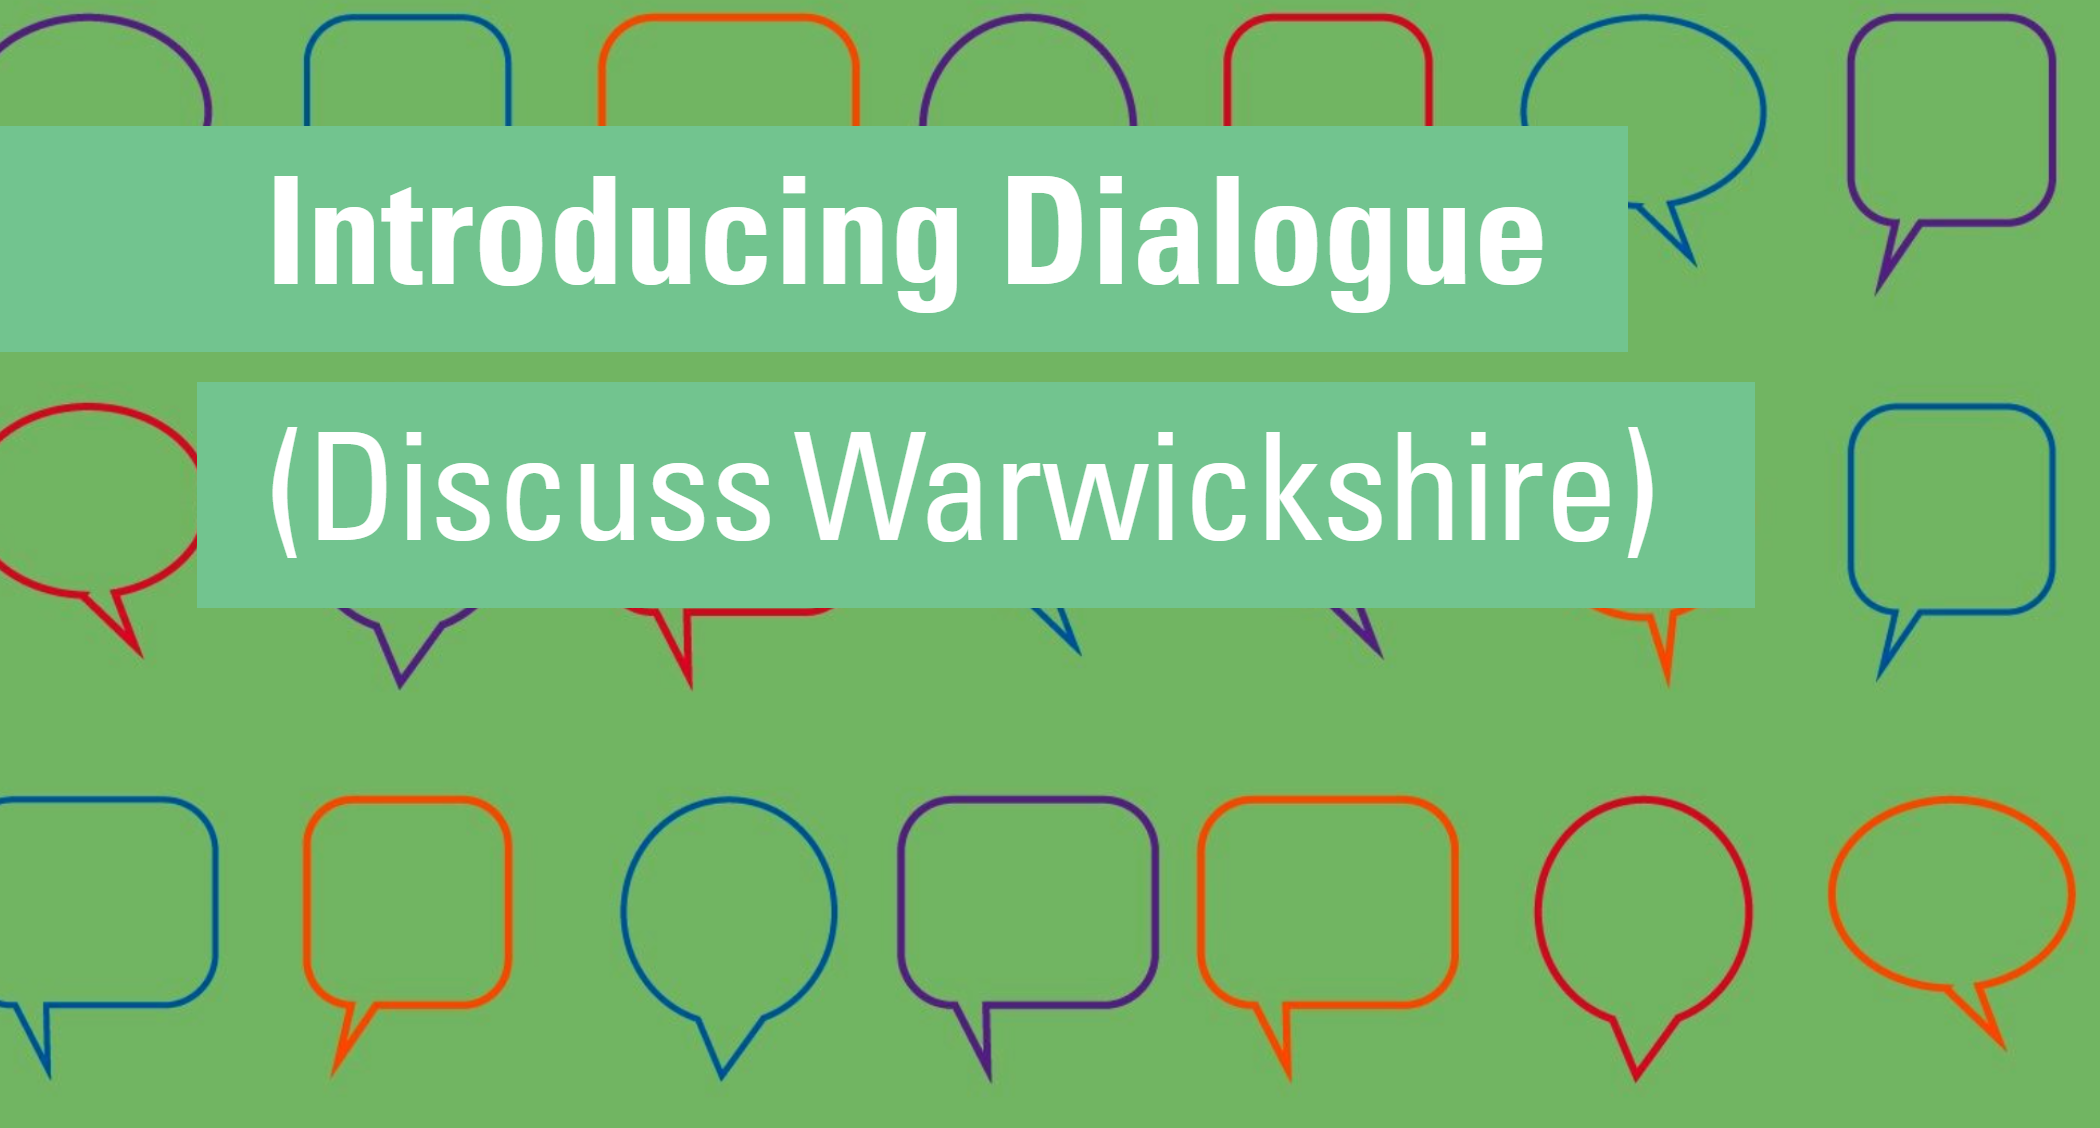 Introducing Dialogue (Discuss Warwickshire) white text on green background featuring coloured speech bubble outlines